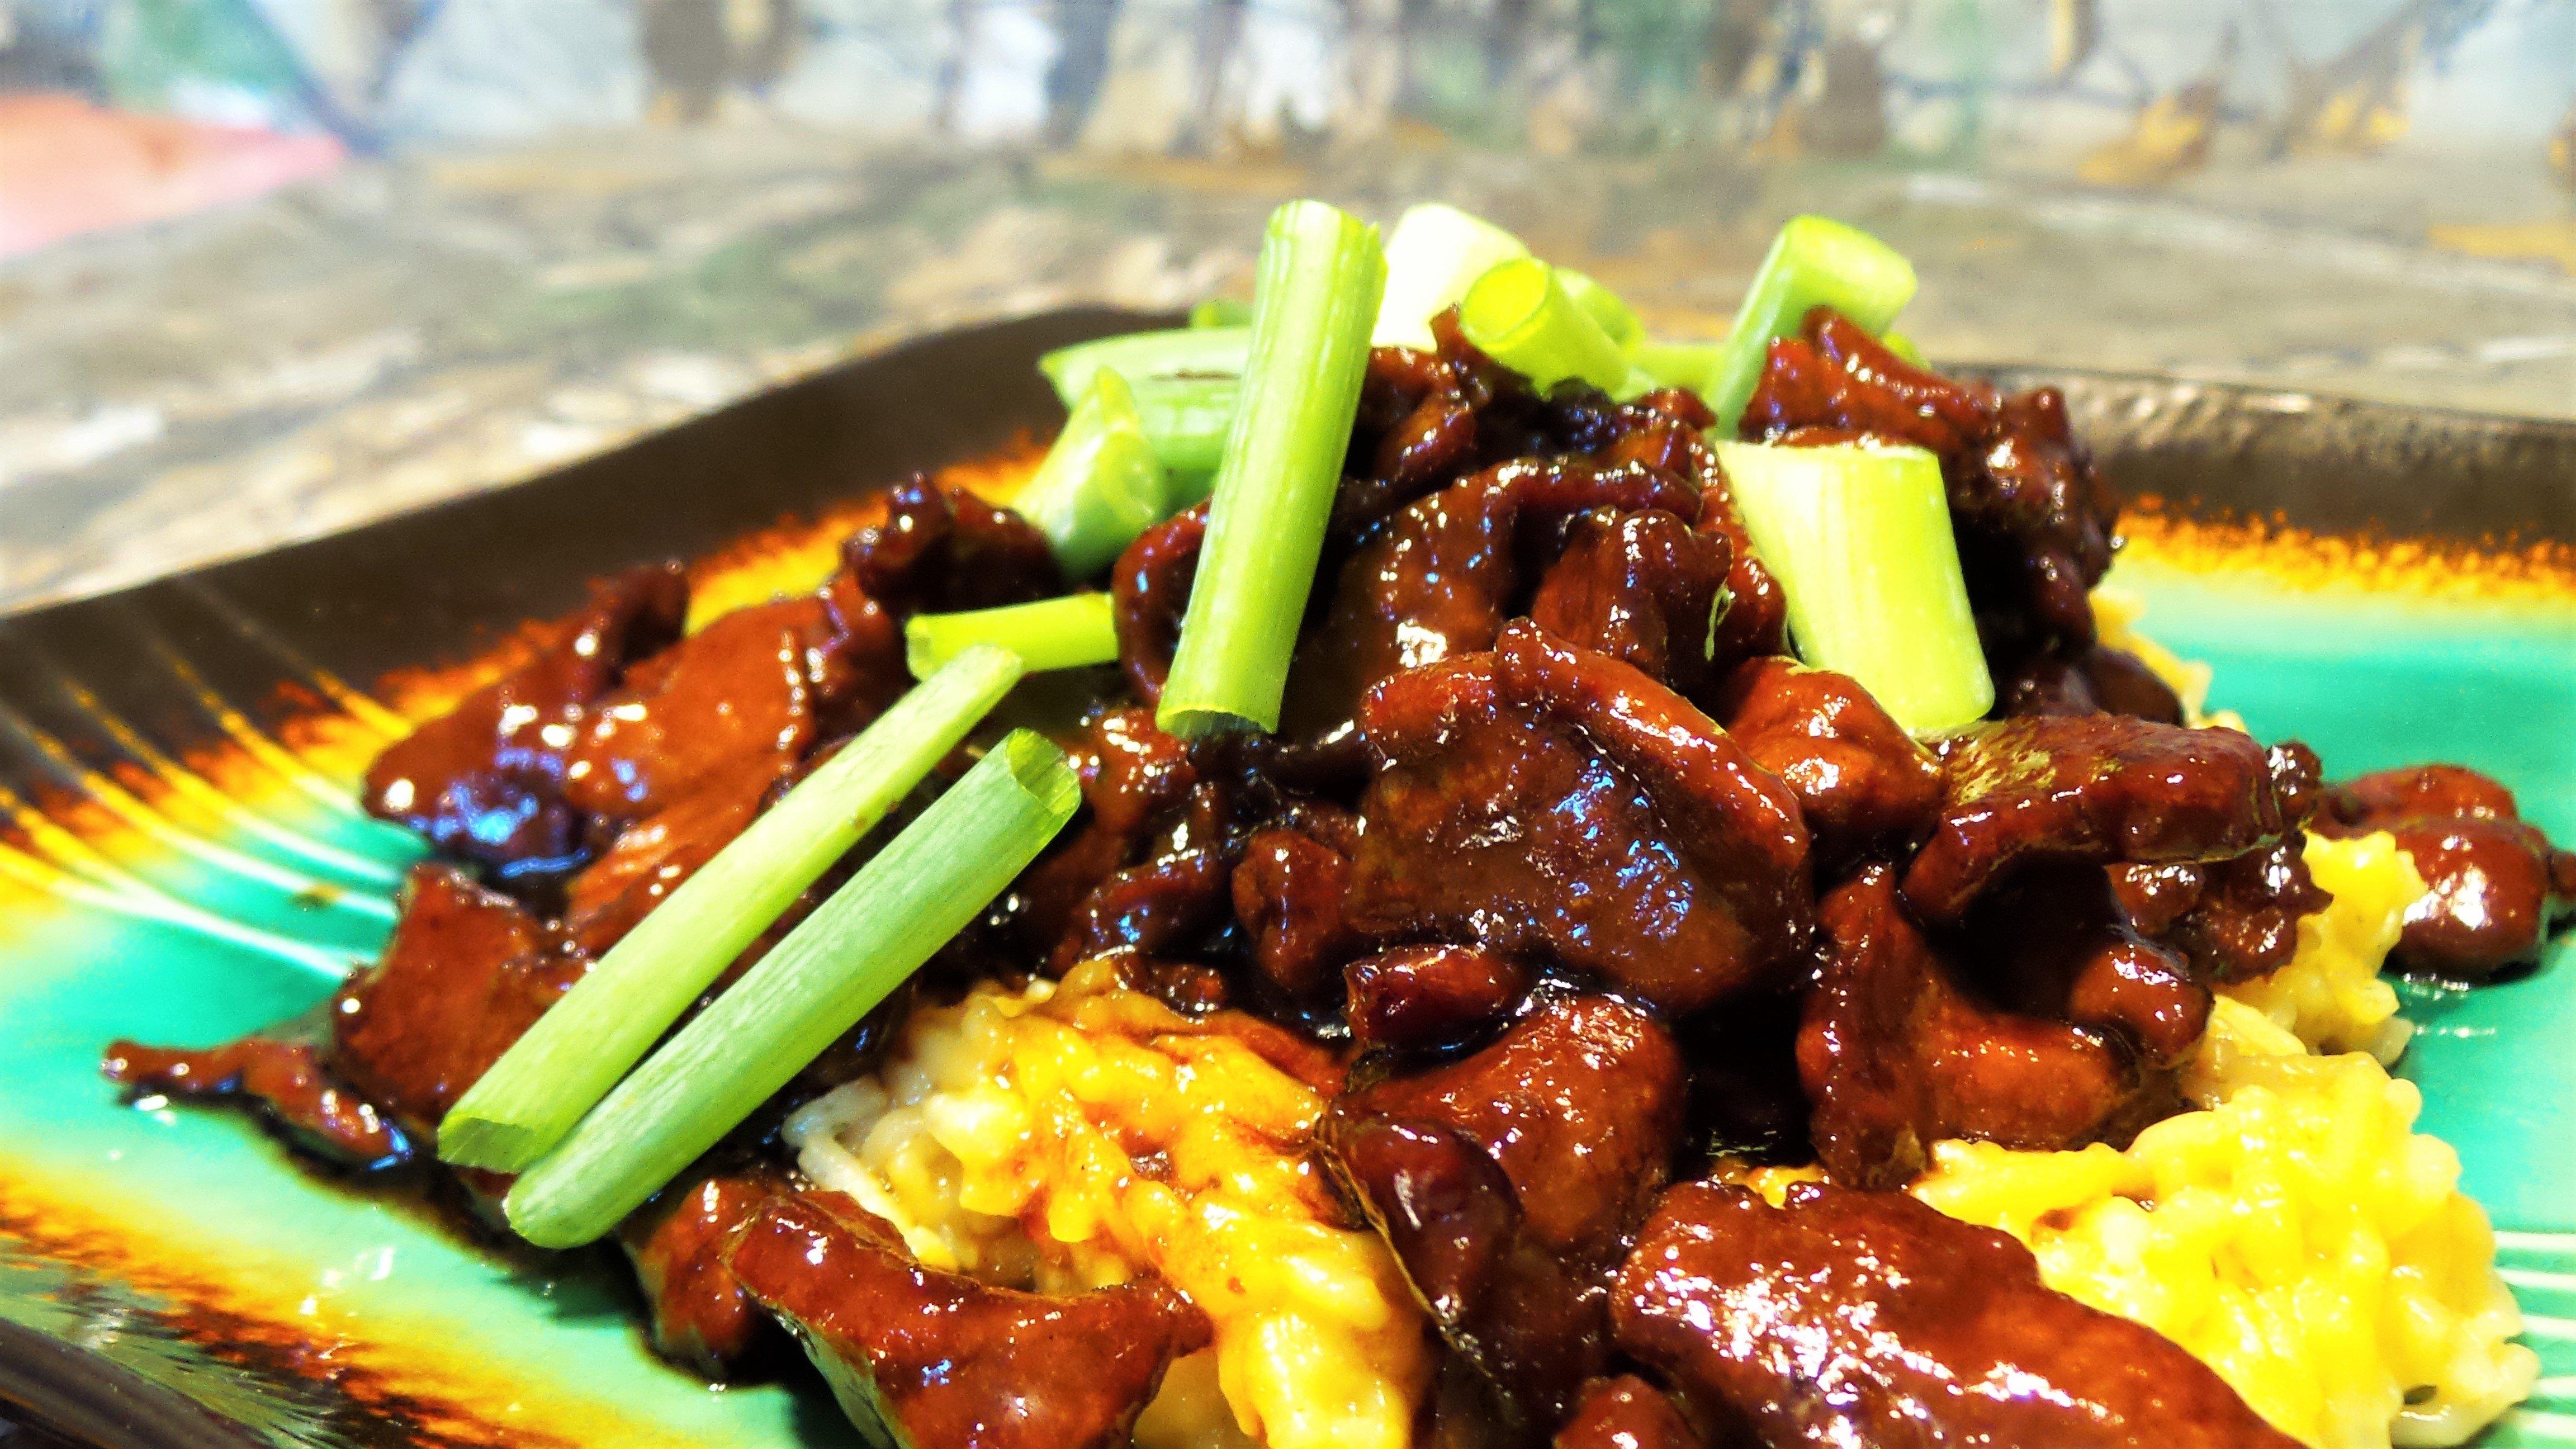 Serve the Mongolian Venison over rice and top with green onions.